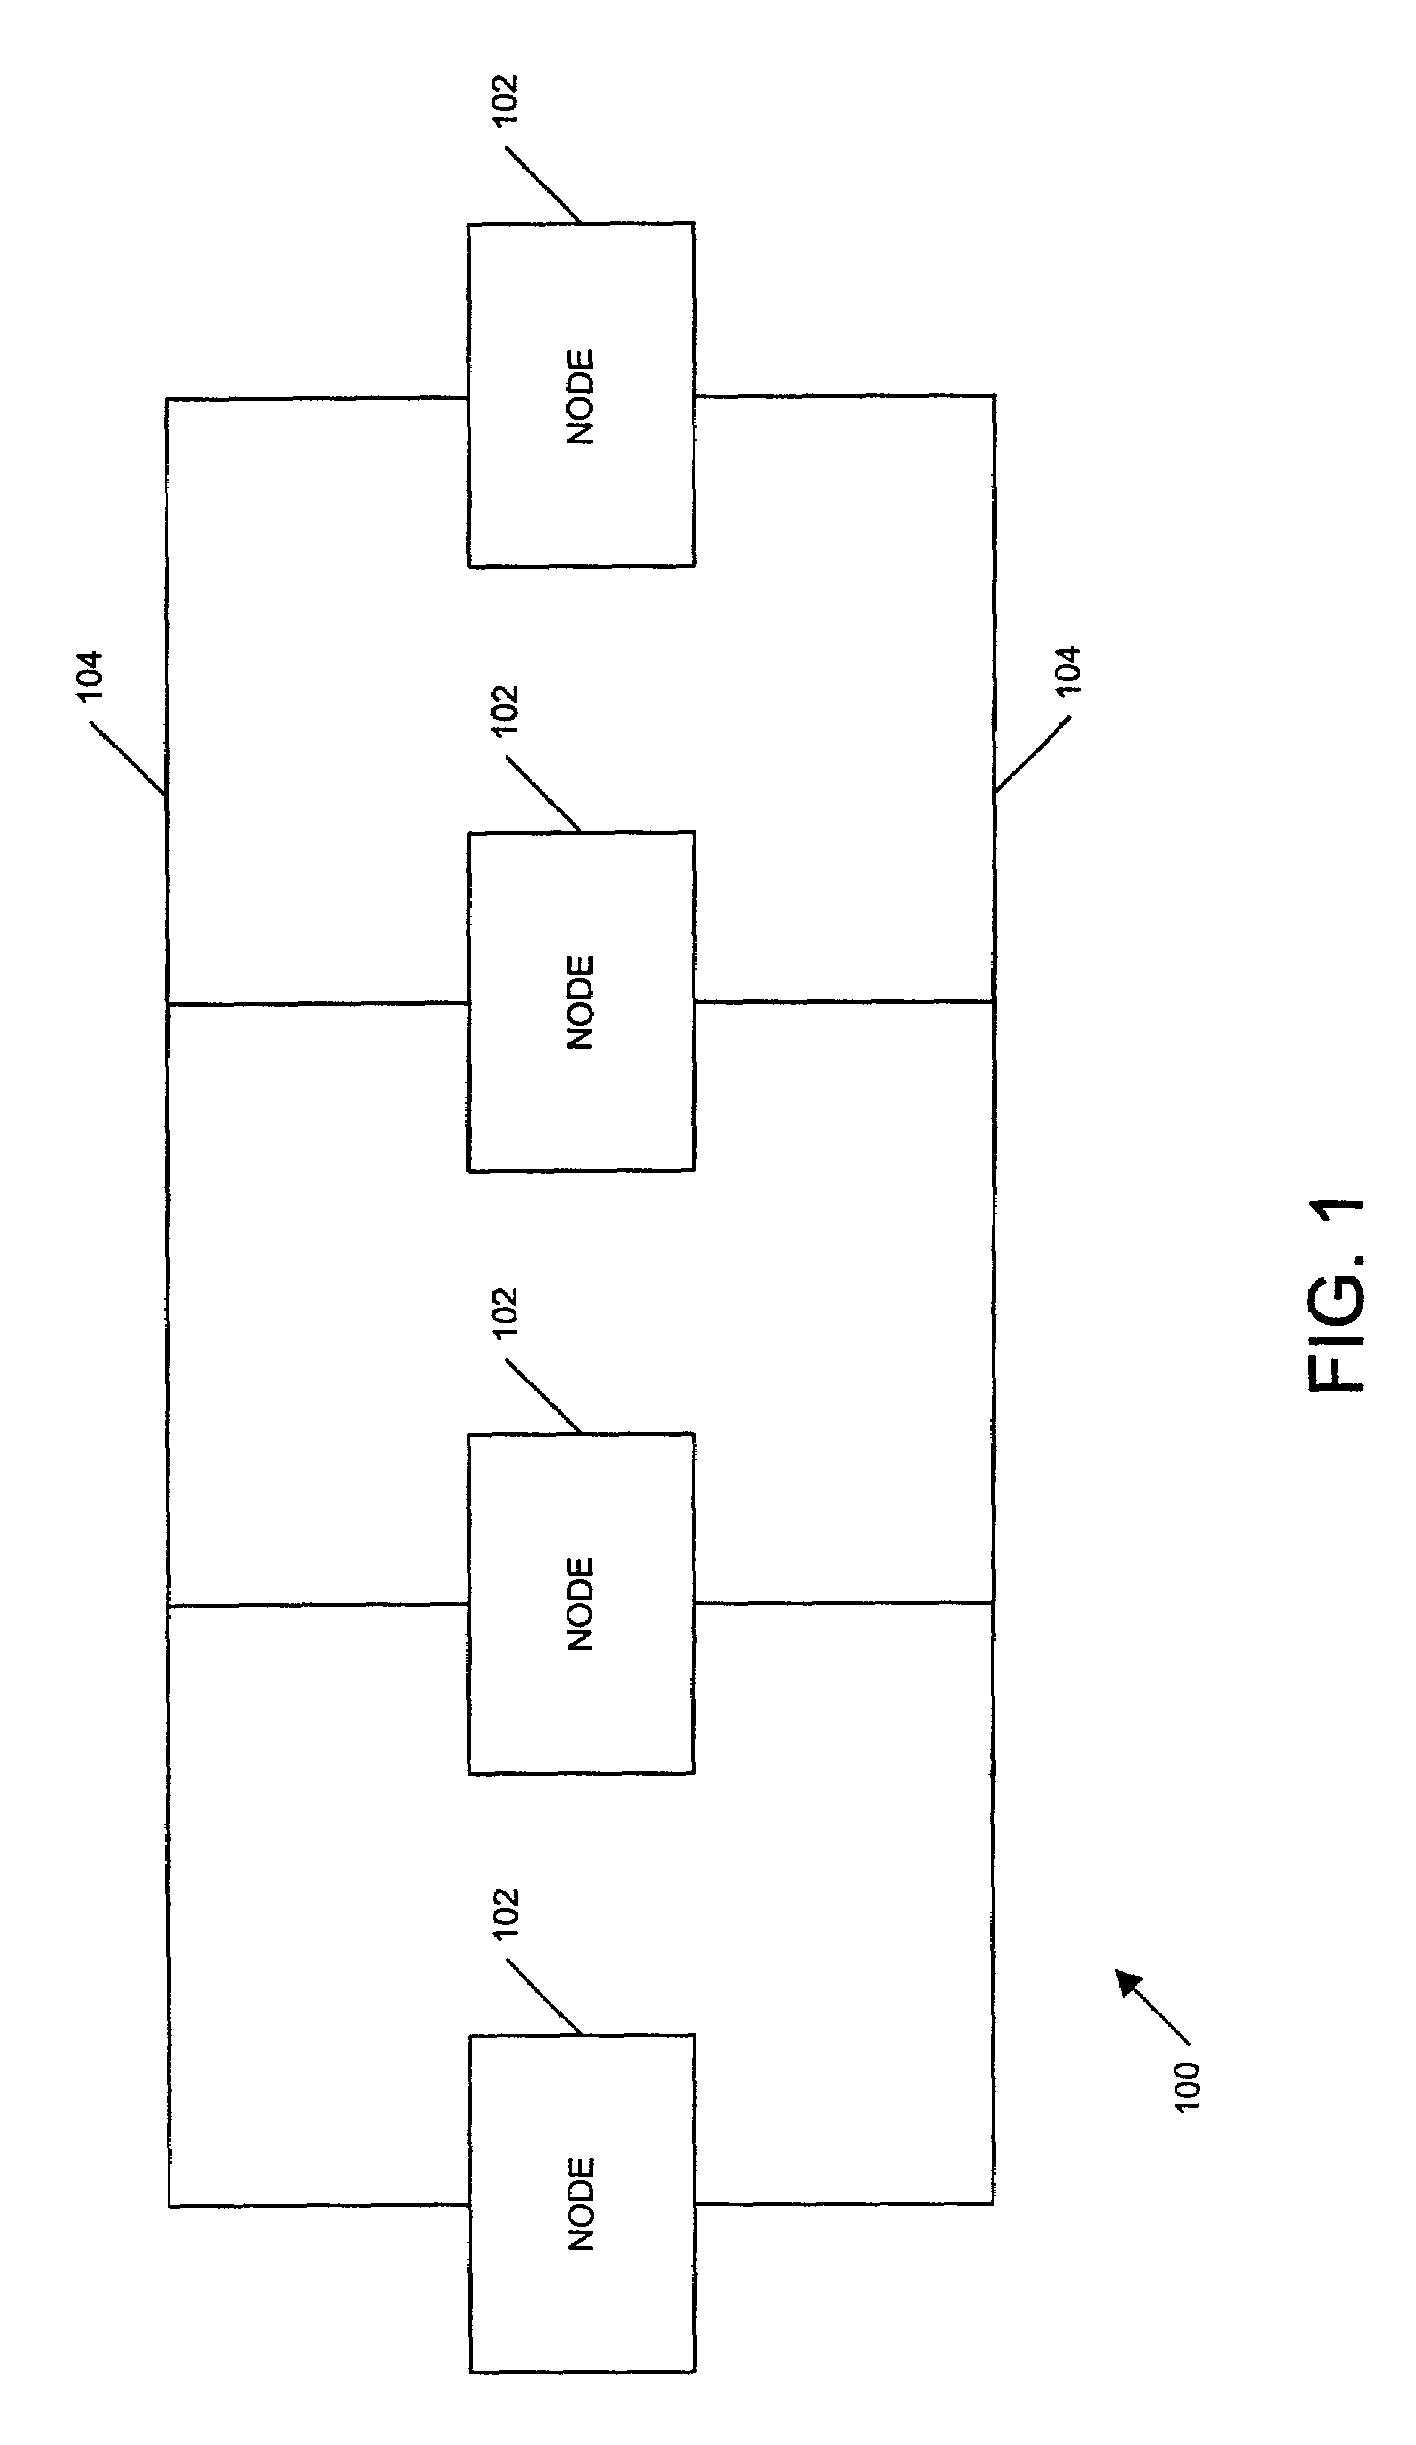 Method and apparatus for exchanging configuration information between nodes operating in a master-slave configuration